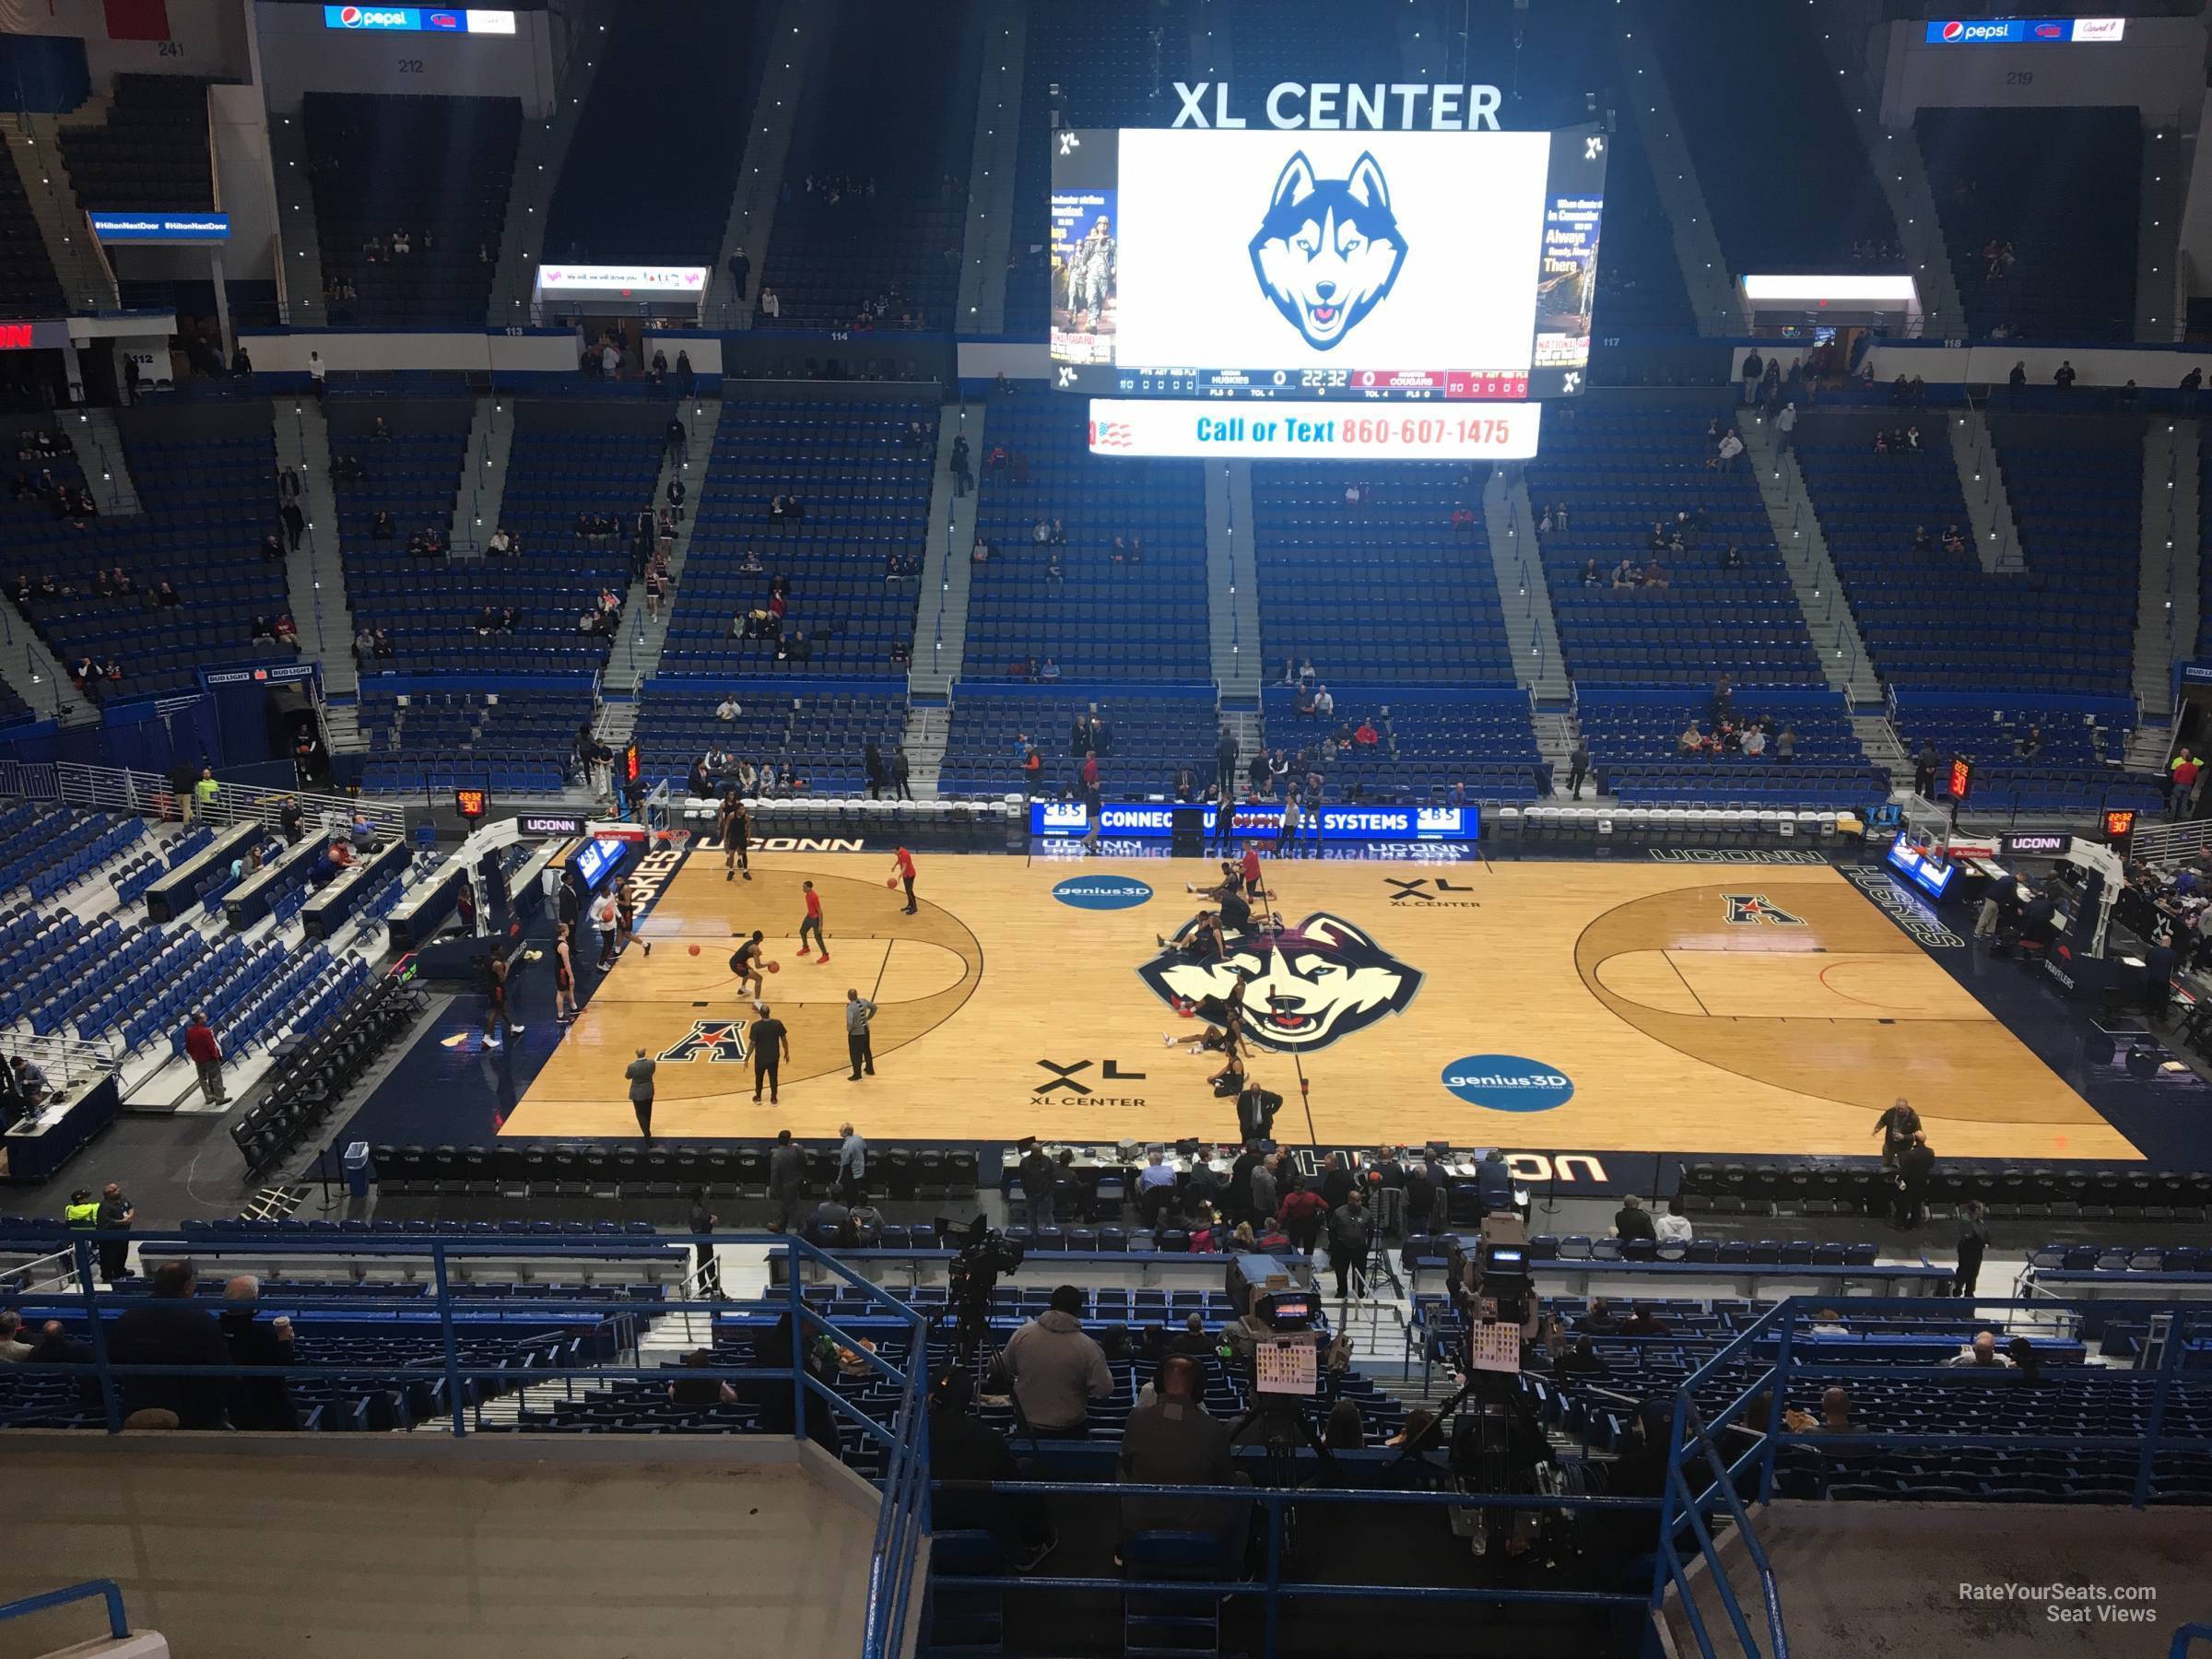 XL Center Section 204 - RateYourSeats.com